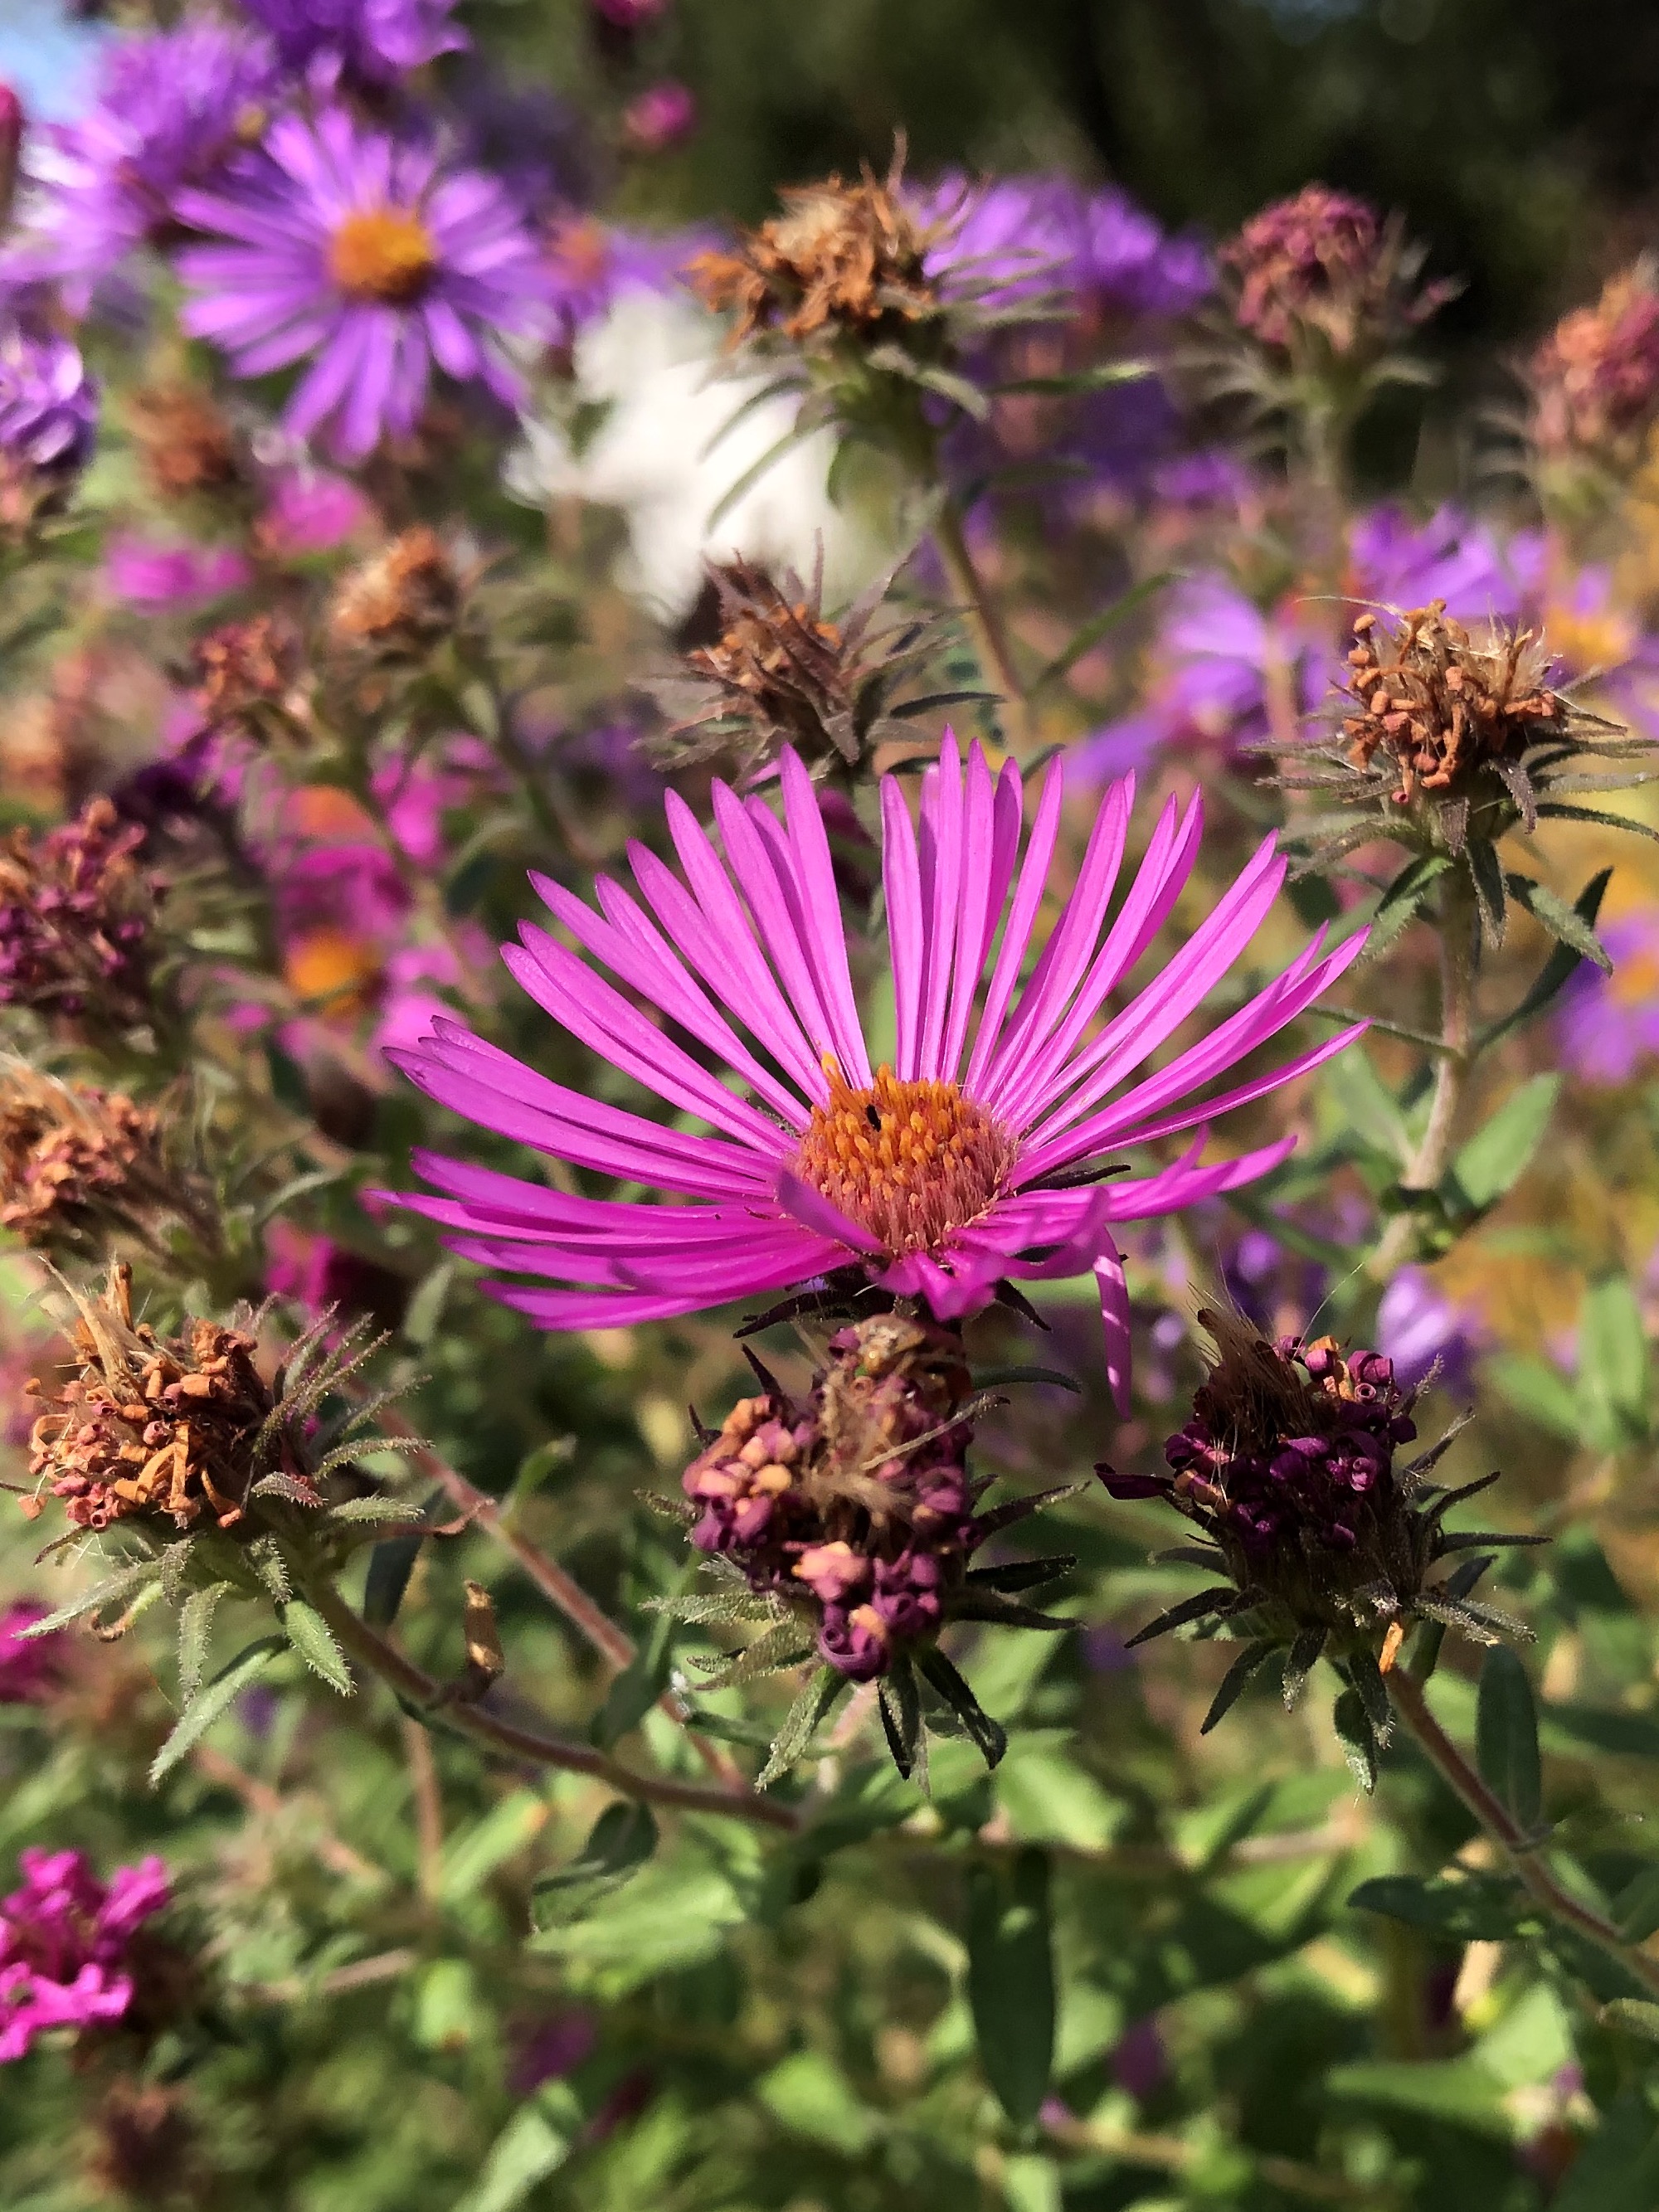 New England Aster on shore of  Vilas Park Lagoon in Madison, Wisconsin on October 2, 2021.